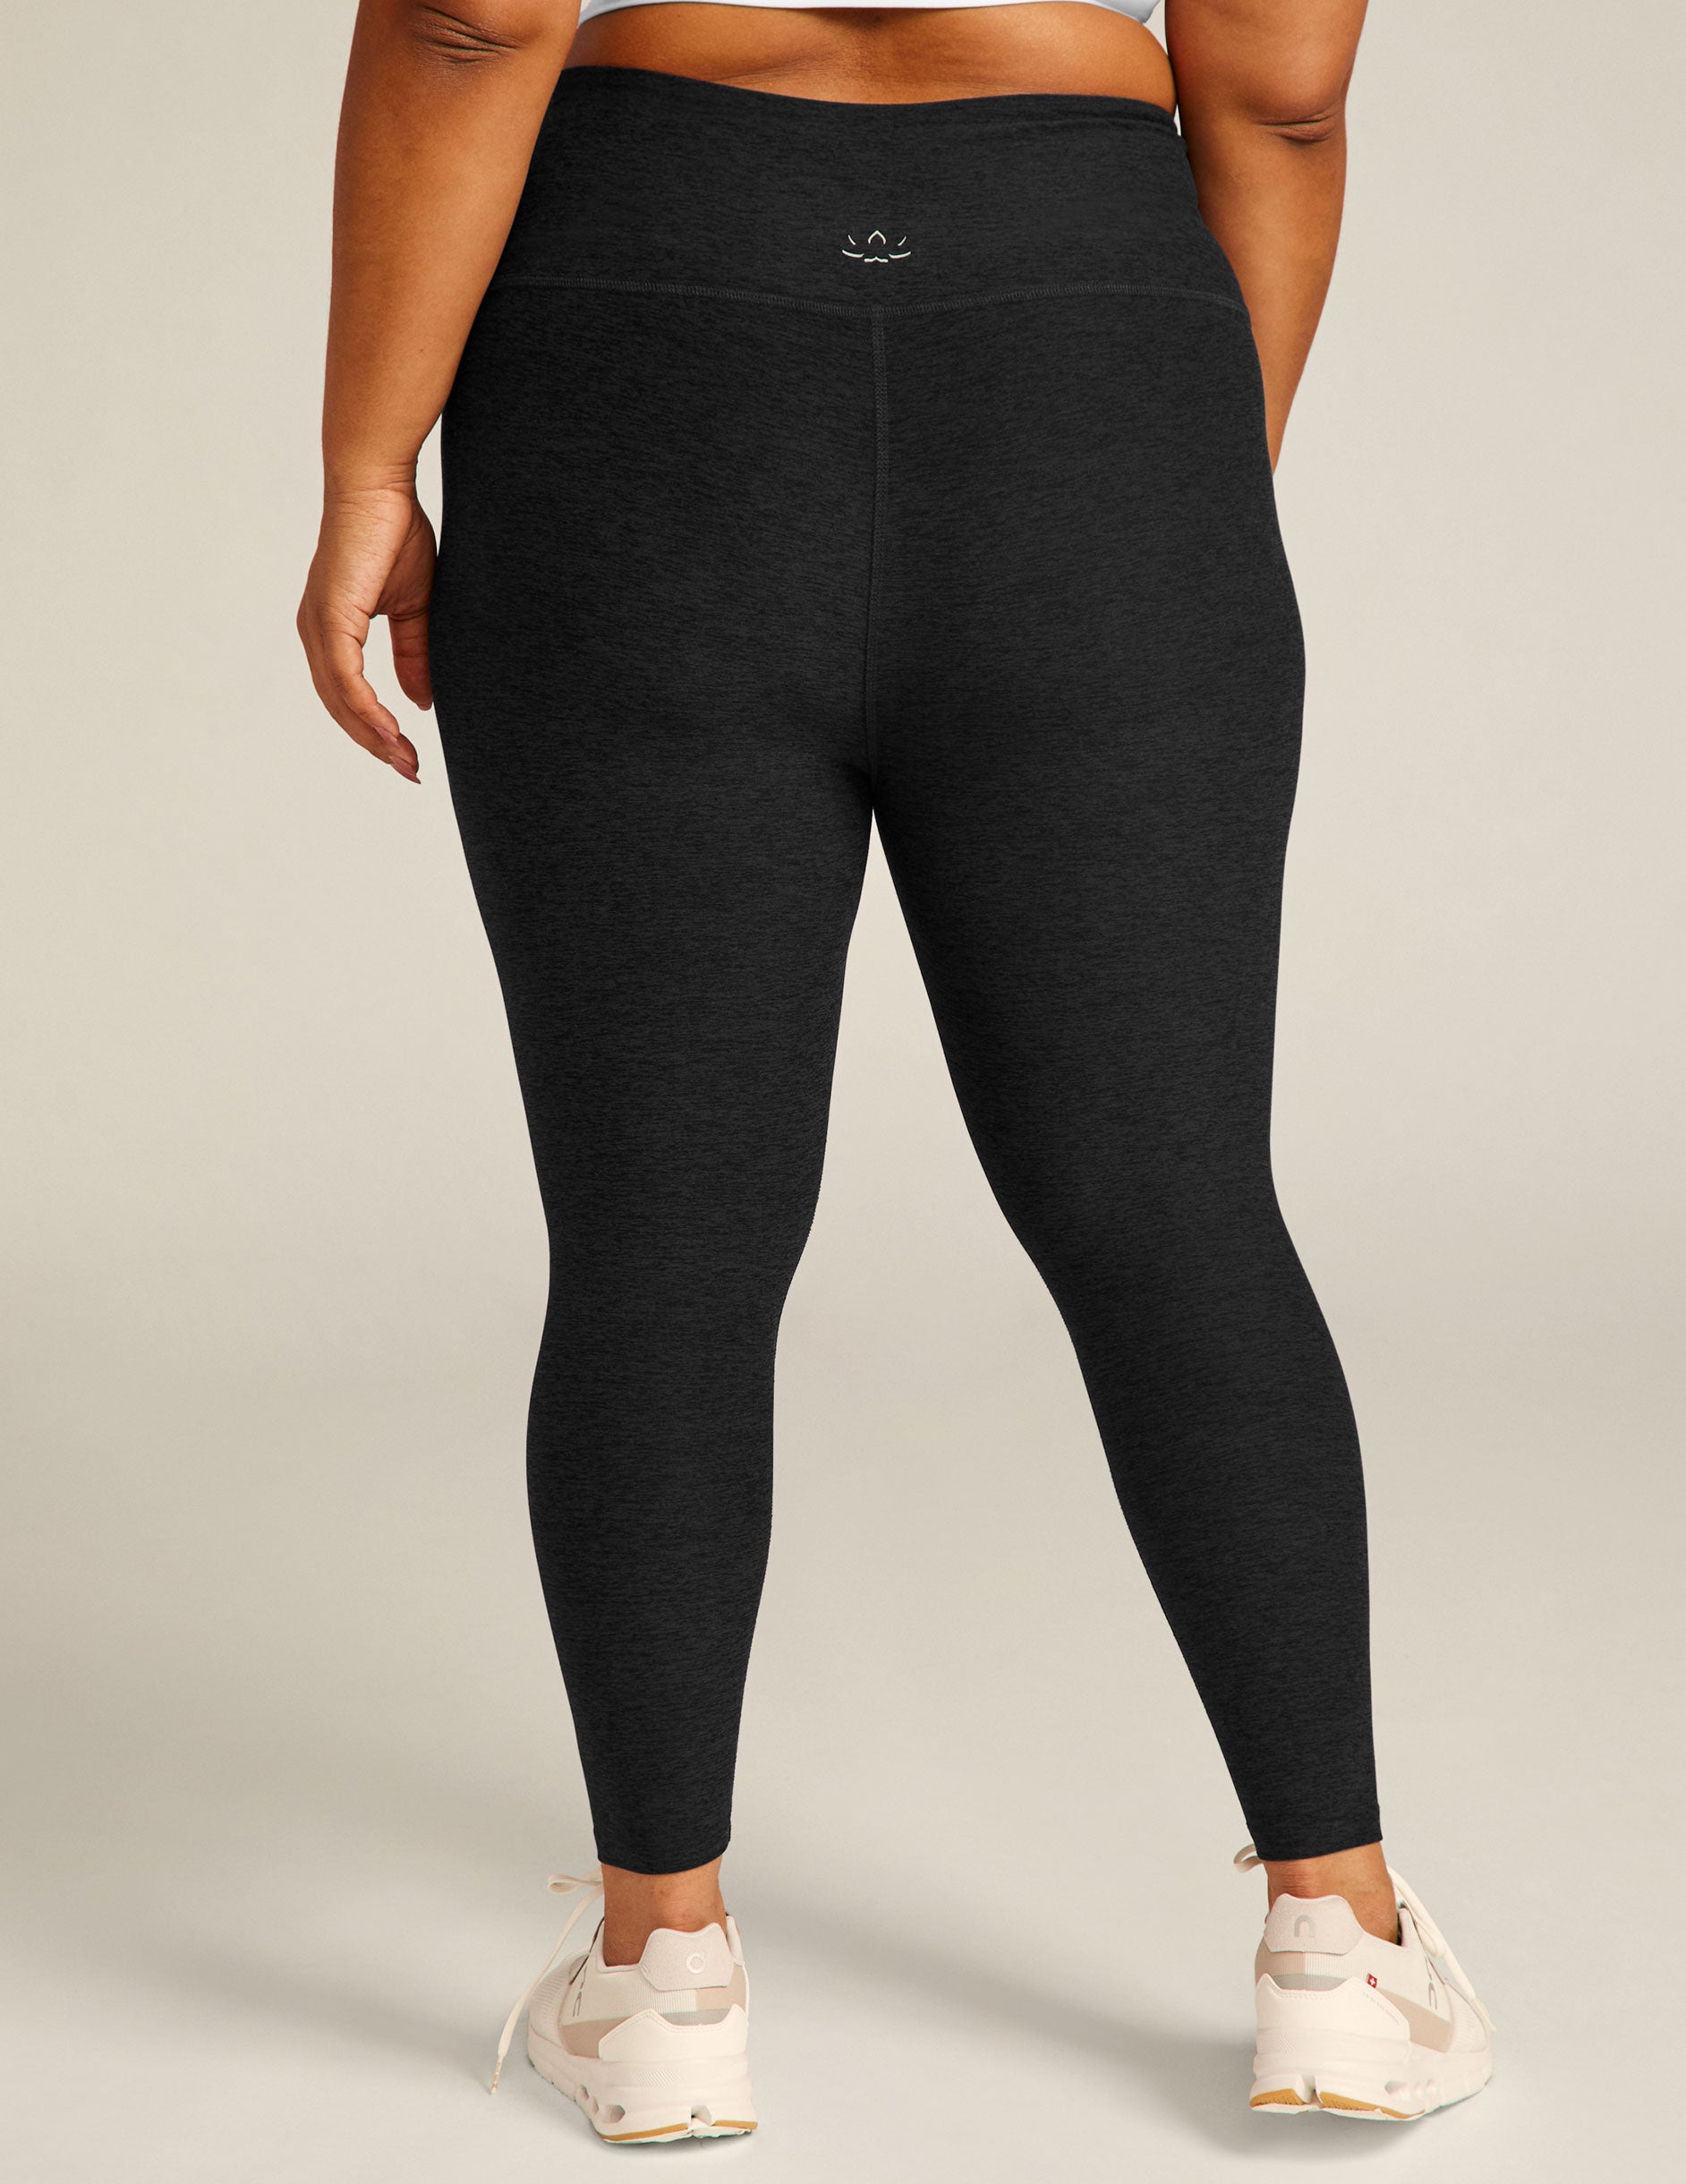 Beyond Yoga Caught In The Midi Leggings  Anthropologie Japan - Women's  Clothing, Accessories & Home